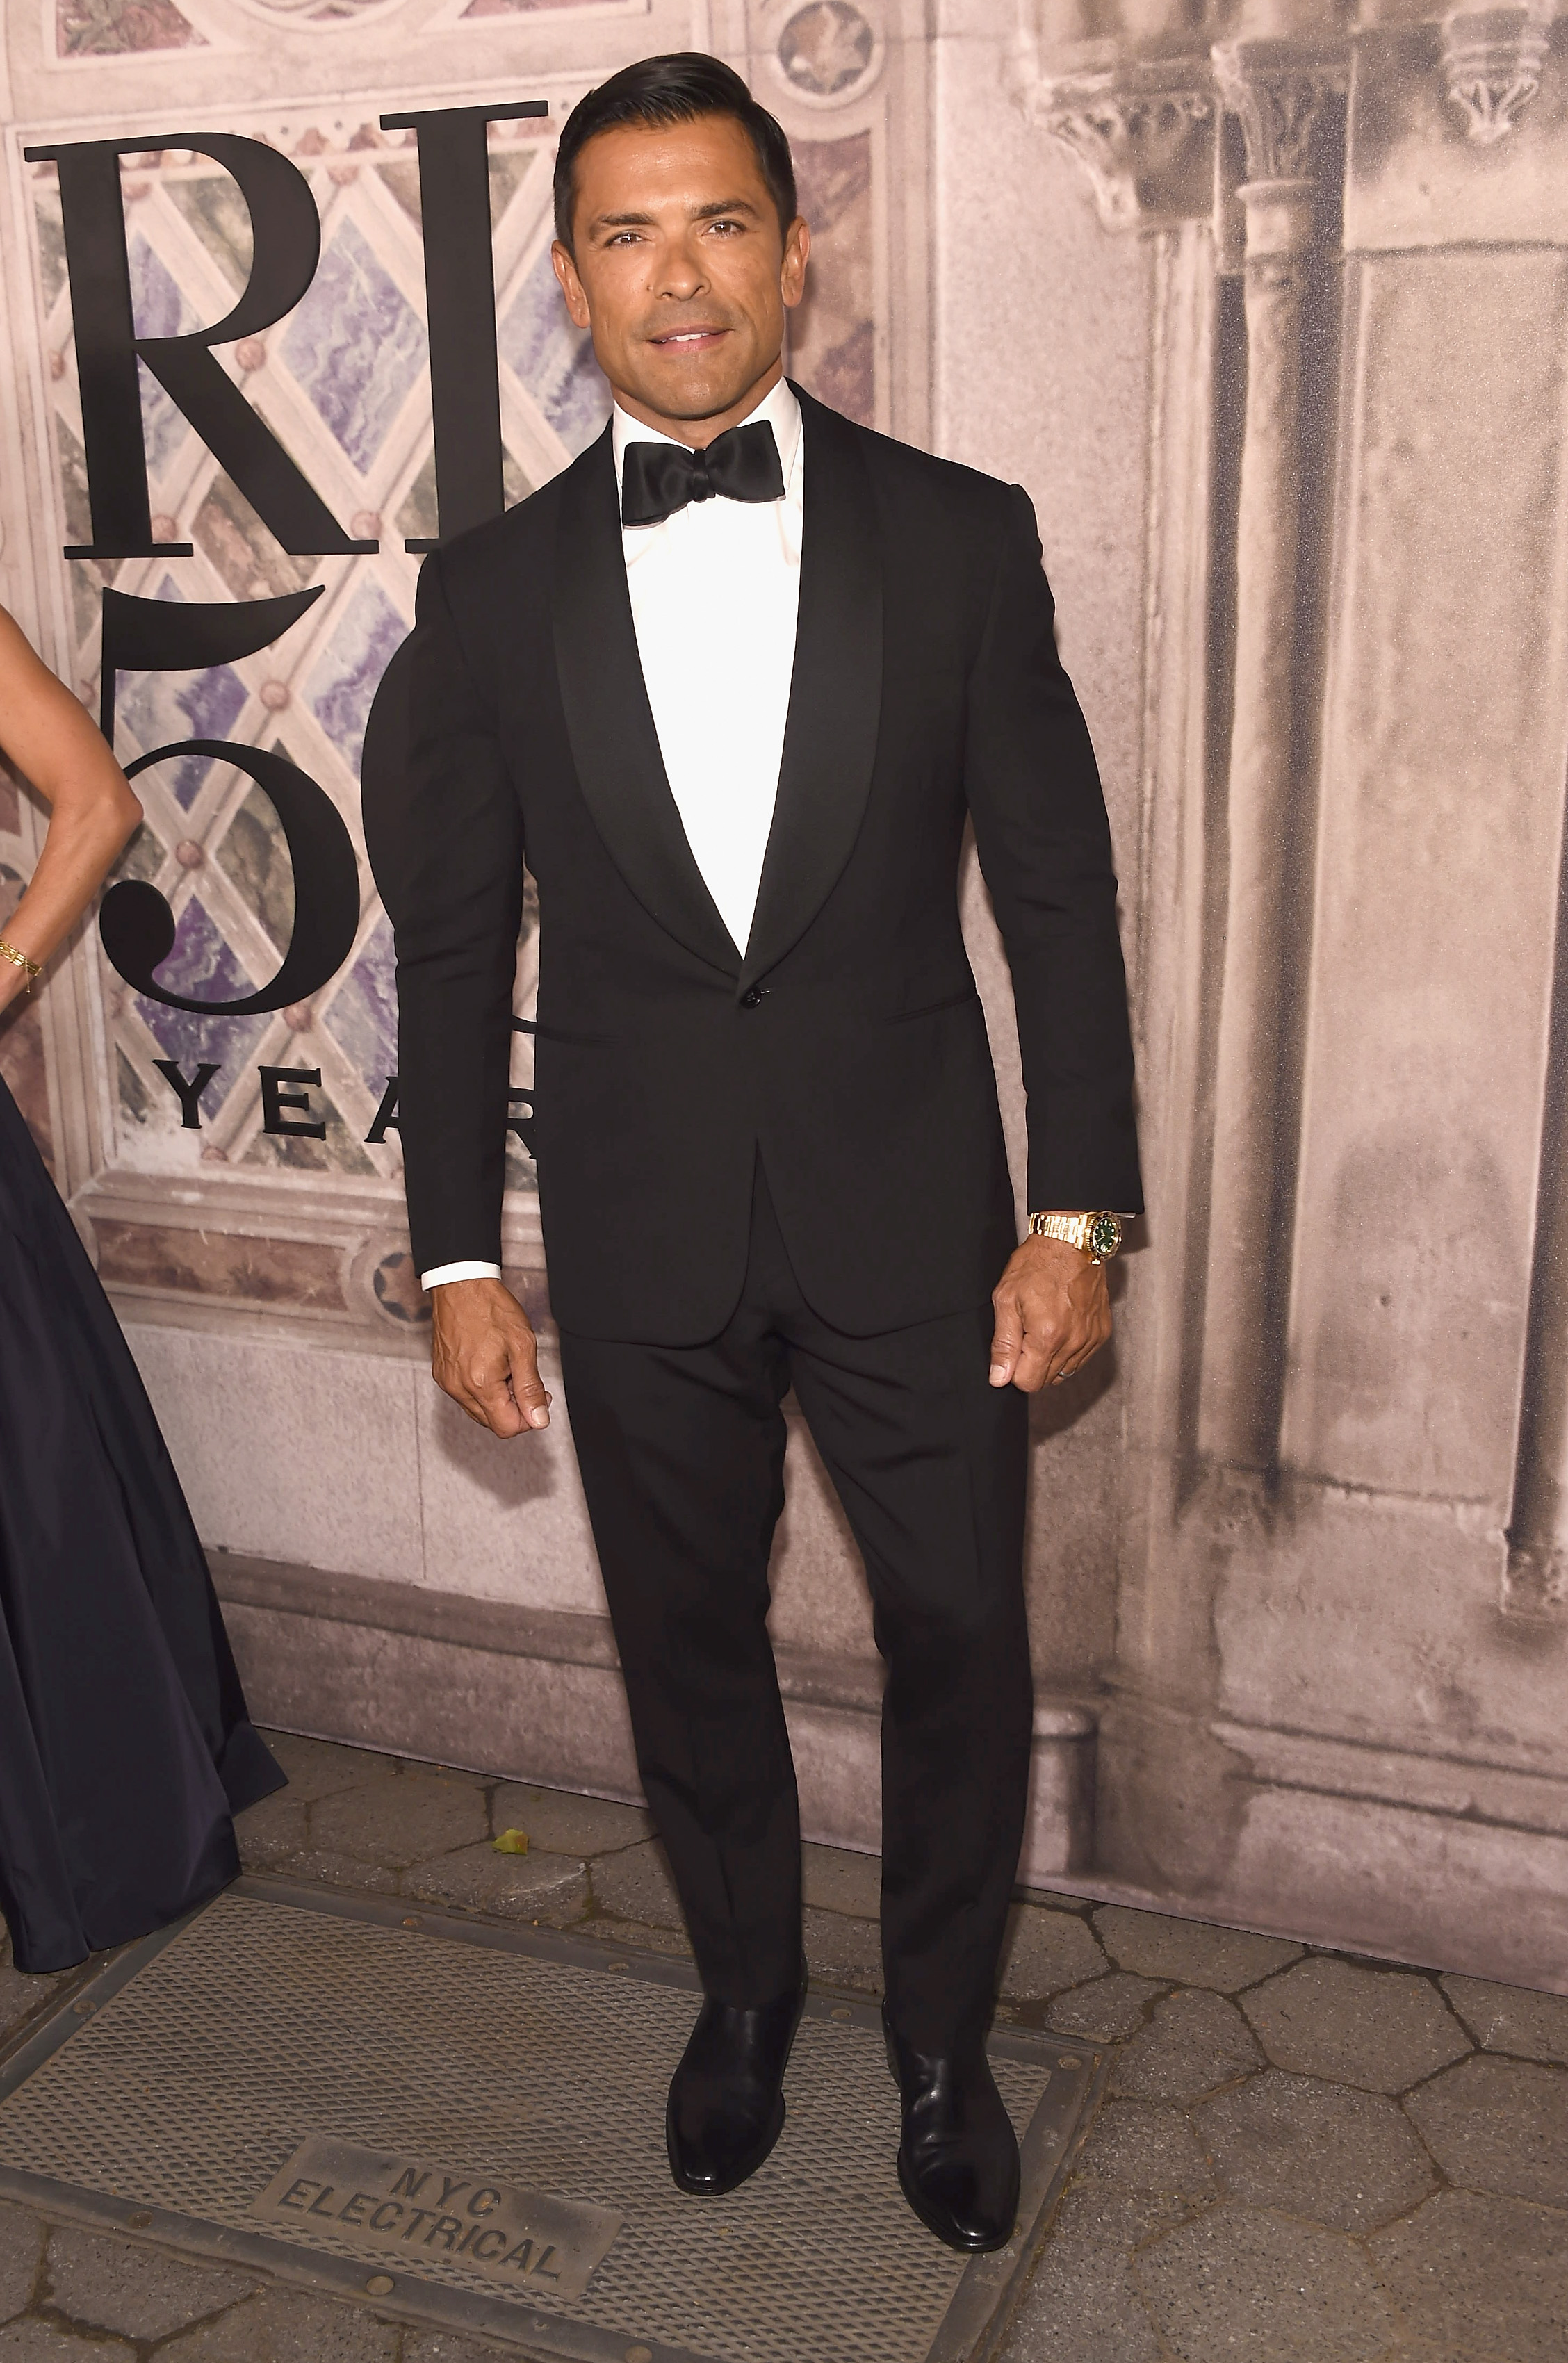 Mark Consuelos Reveals ‘Major Injury’ During ‘Live' Premiere